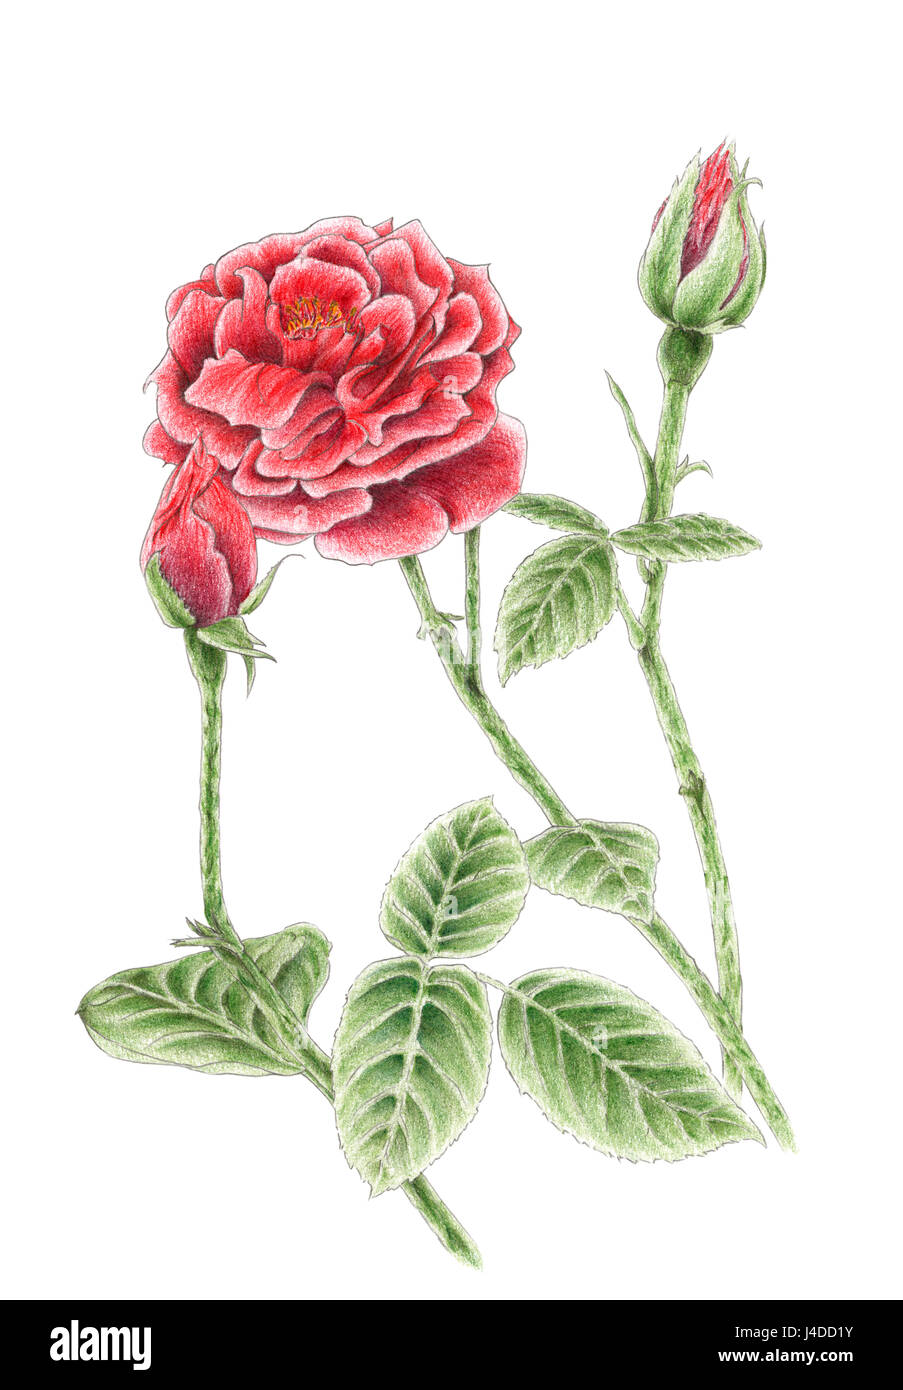 Drawing of a garden rose over white background. Colored pencils on paper. Stock Photo